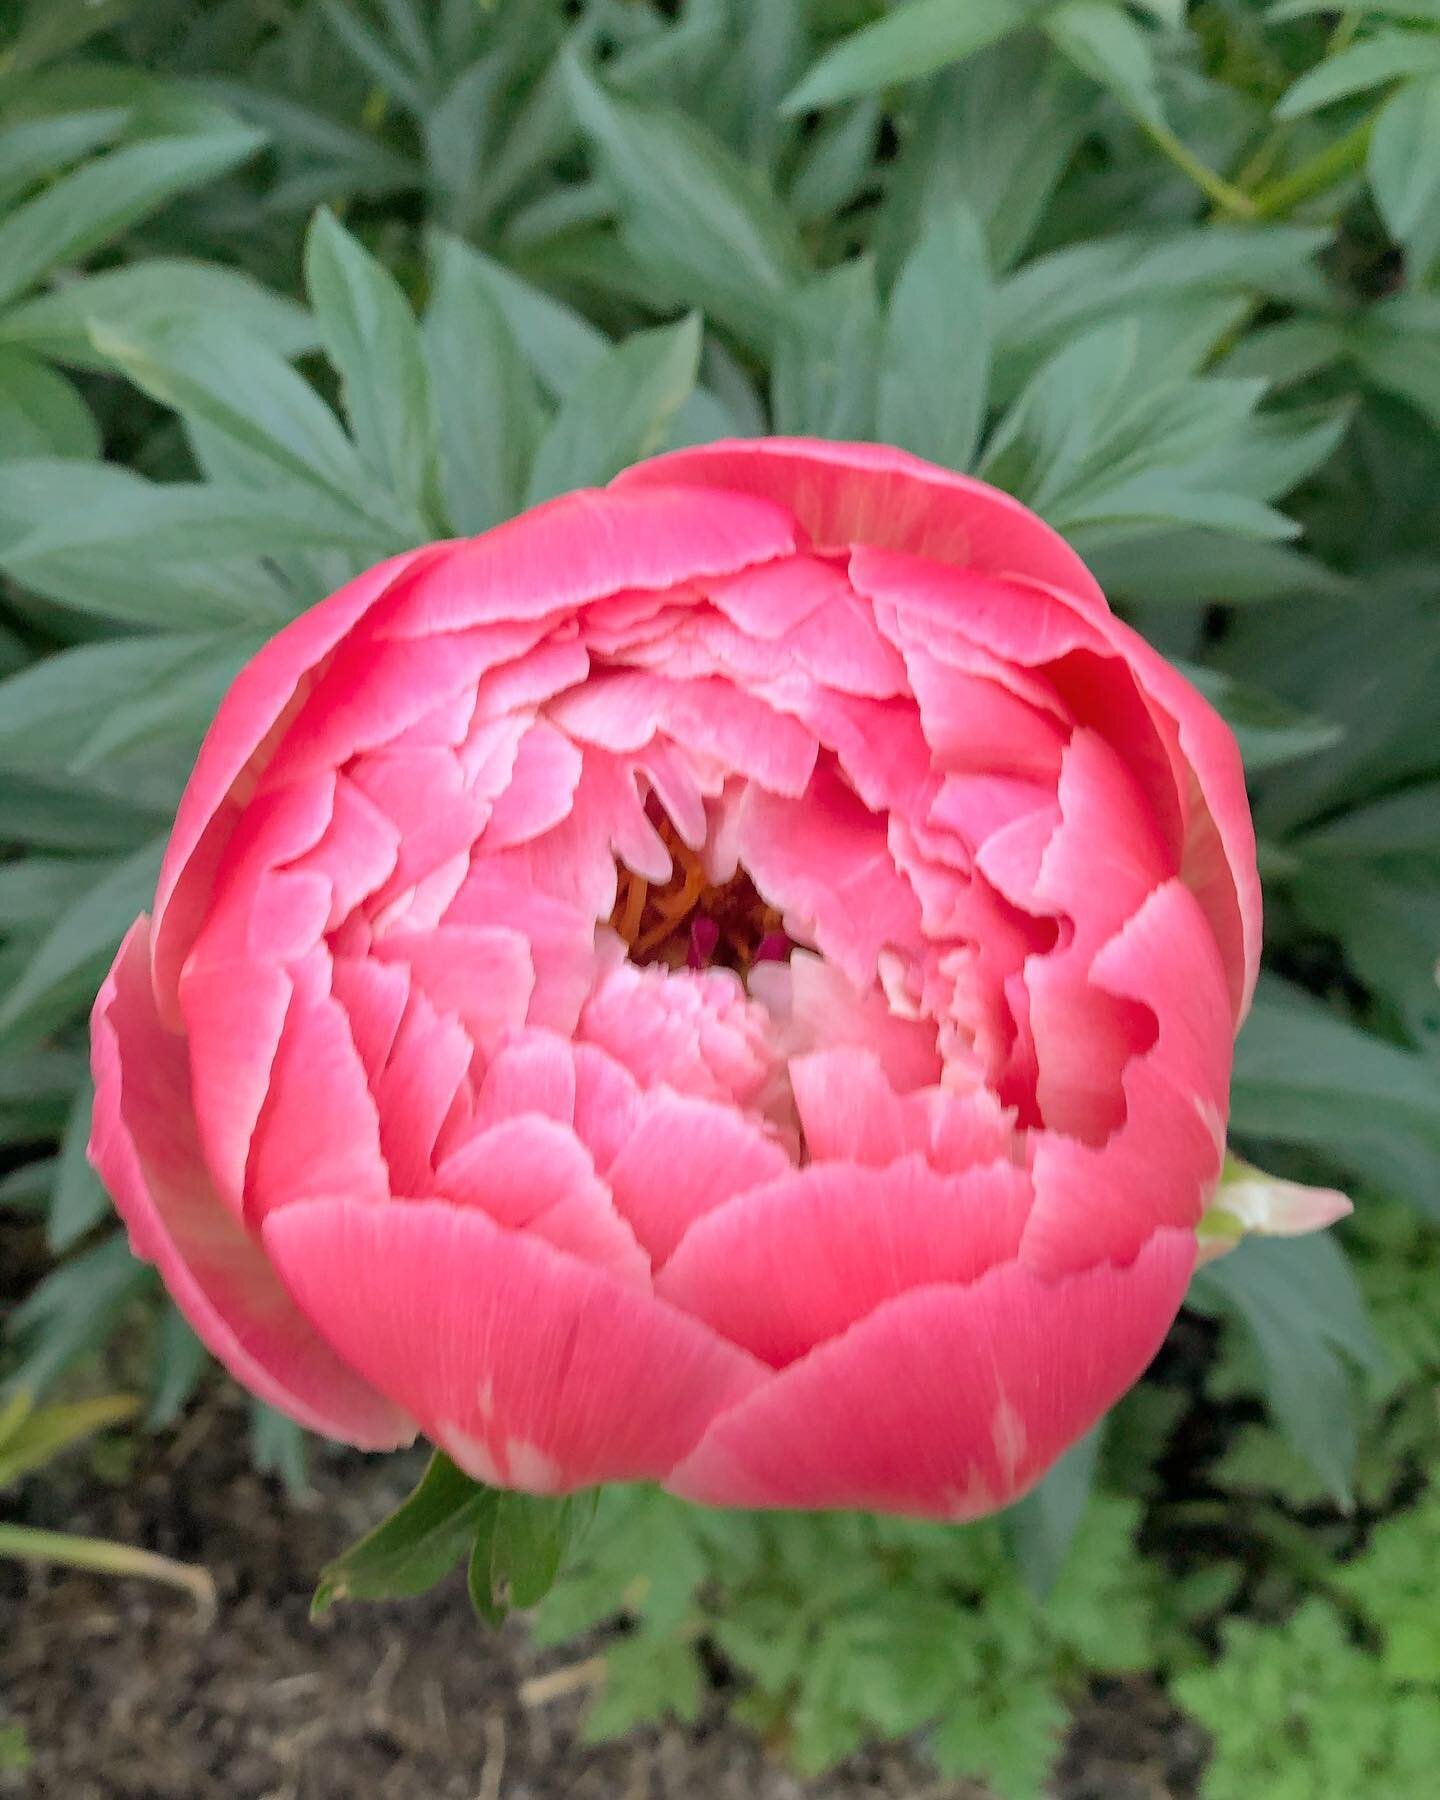 This coral beauty is about to burst! #peony#peonies 🌸